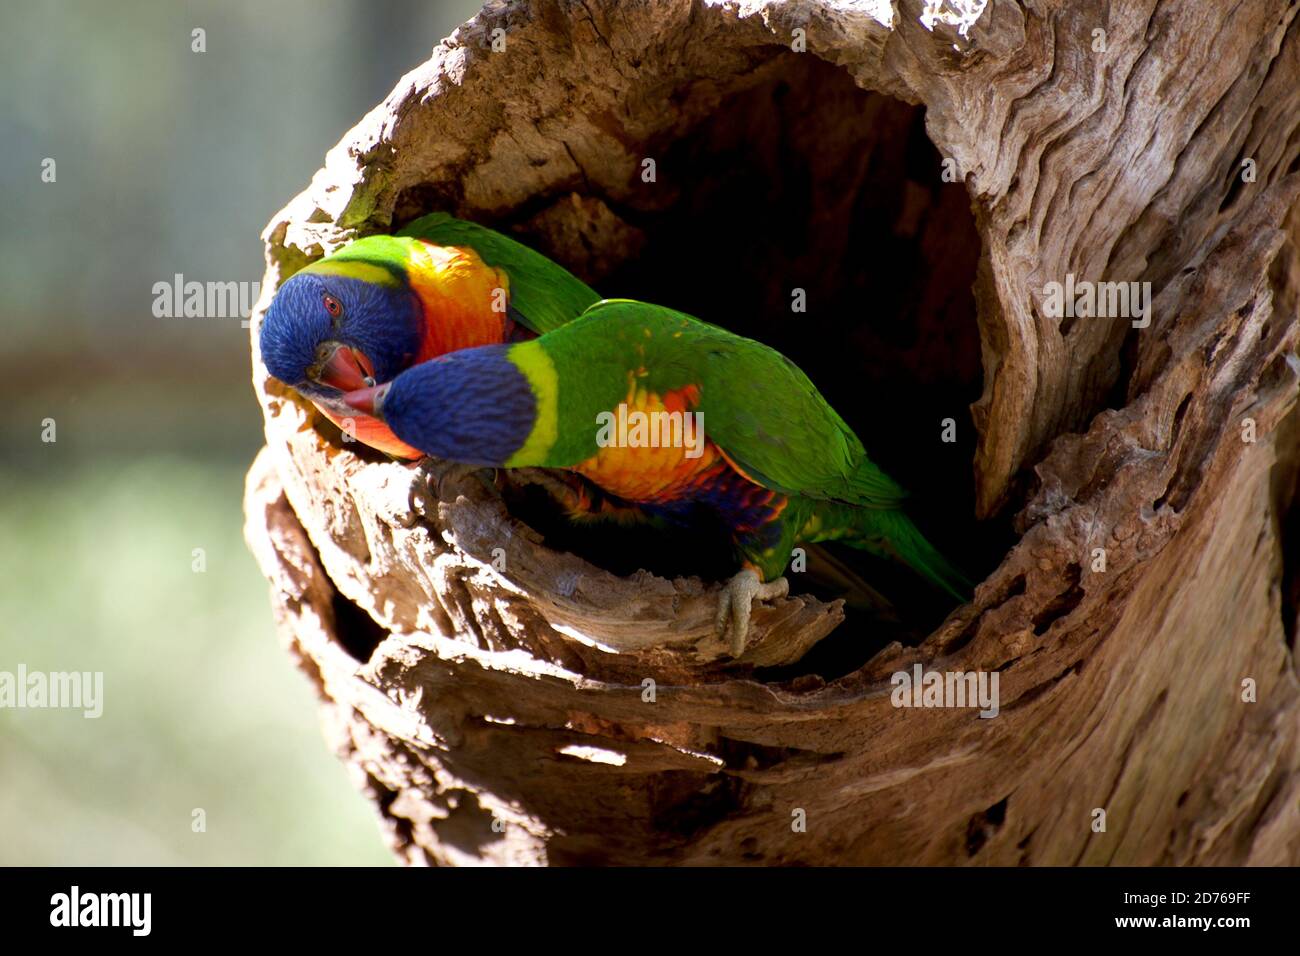 A pair of Rainbow Lorikeets are sitting in their nest hole - fighting over a seed. In the Land Of Parrots at Healesville Sanctuary in Victoria, Aus. Stock Photo